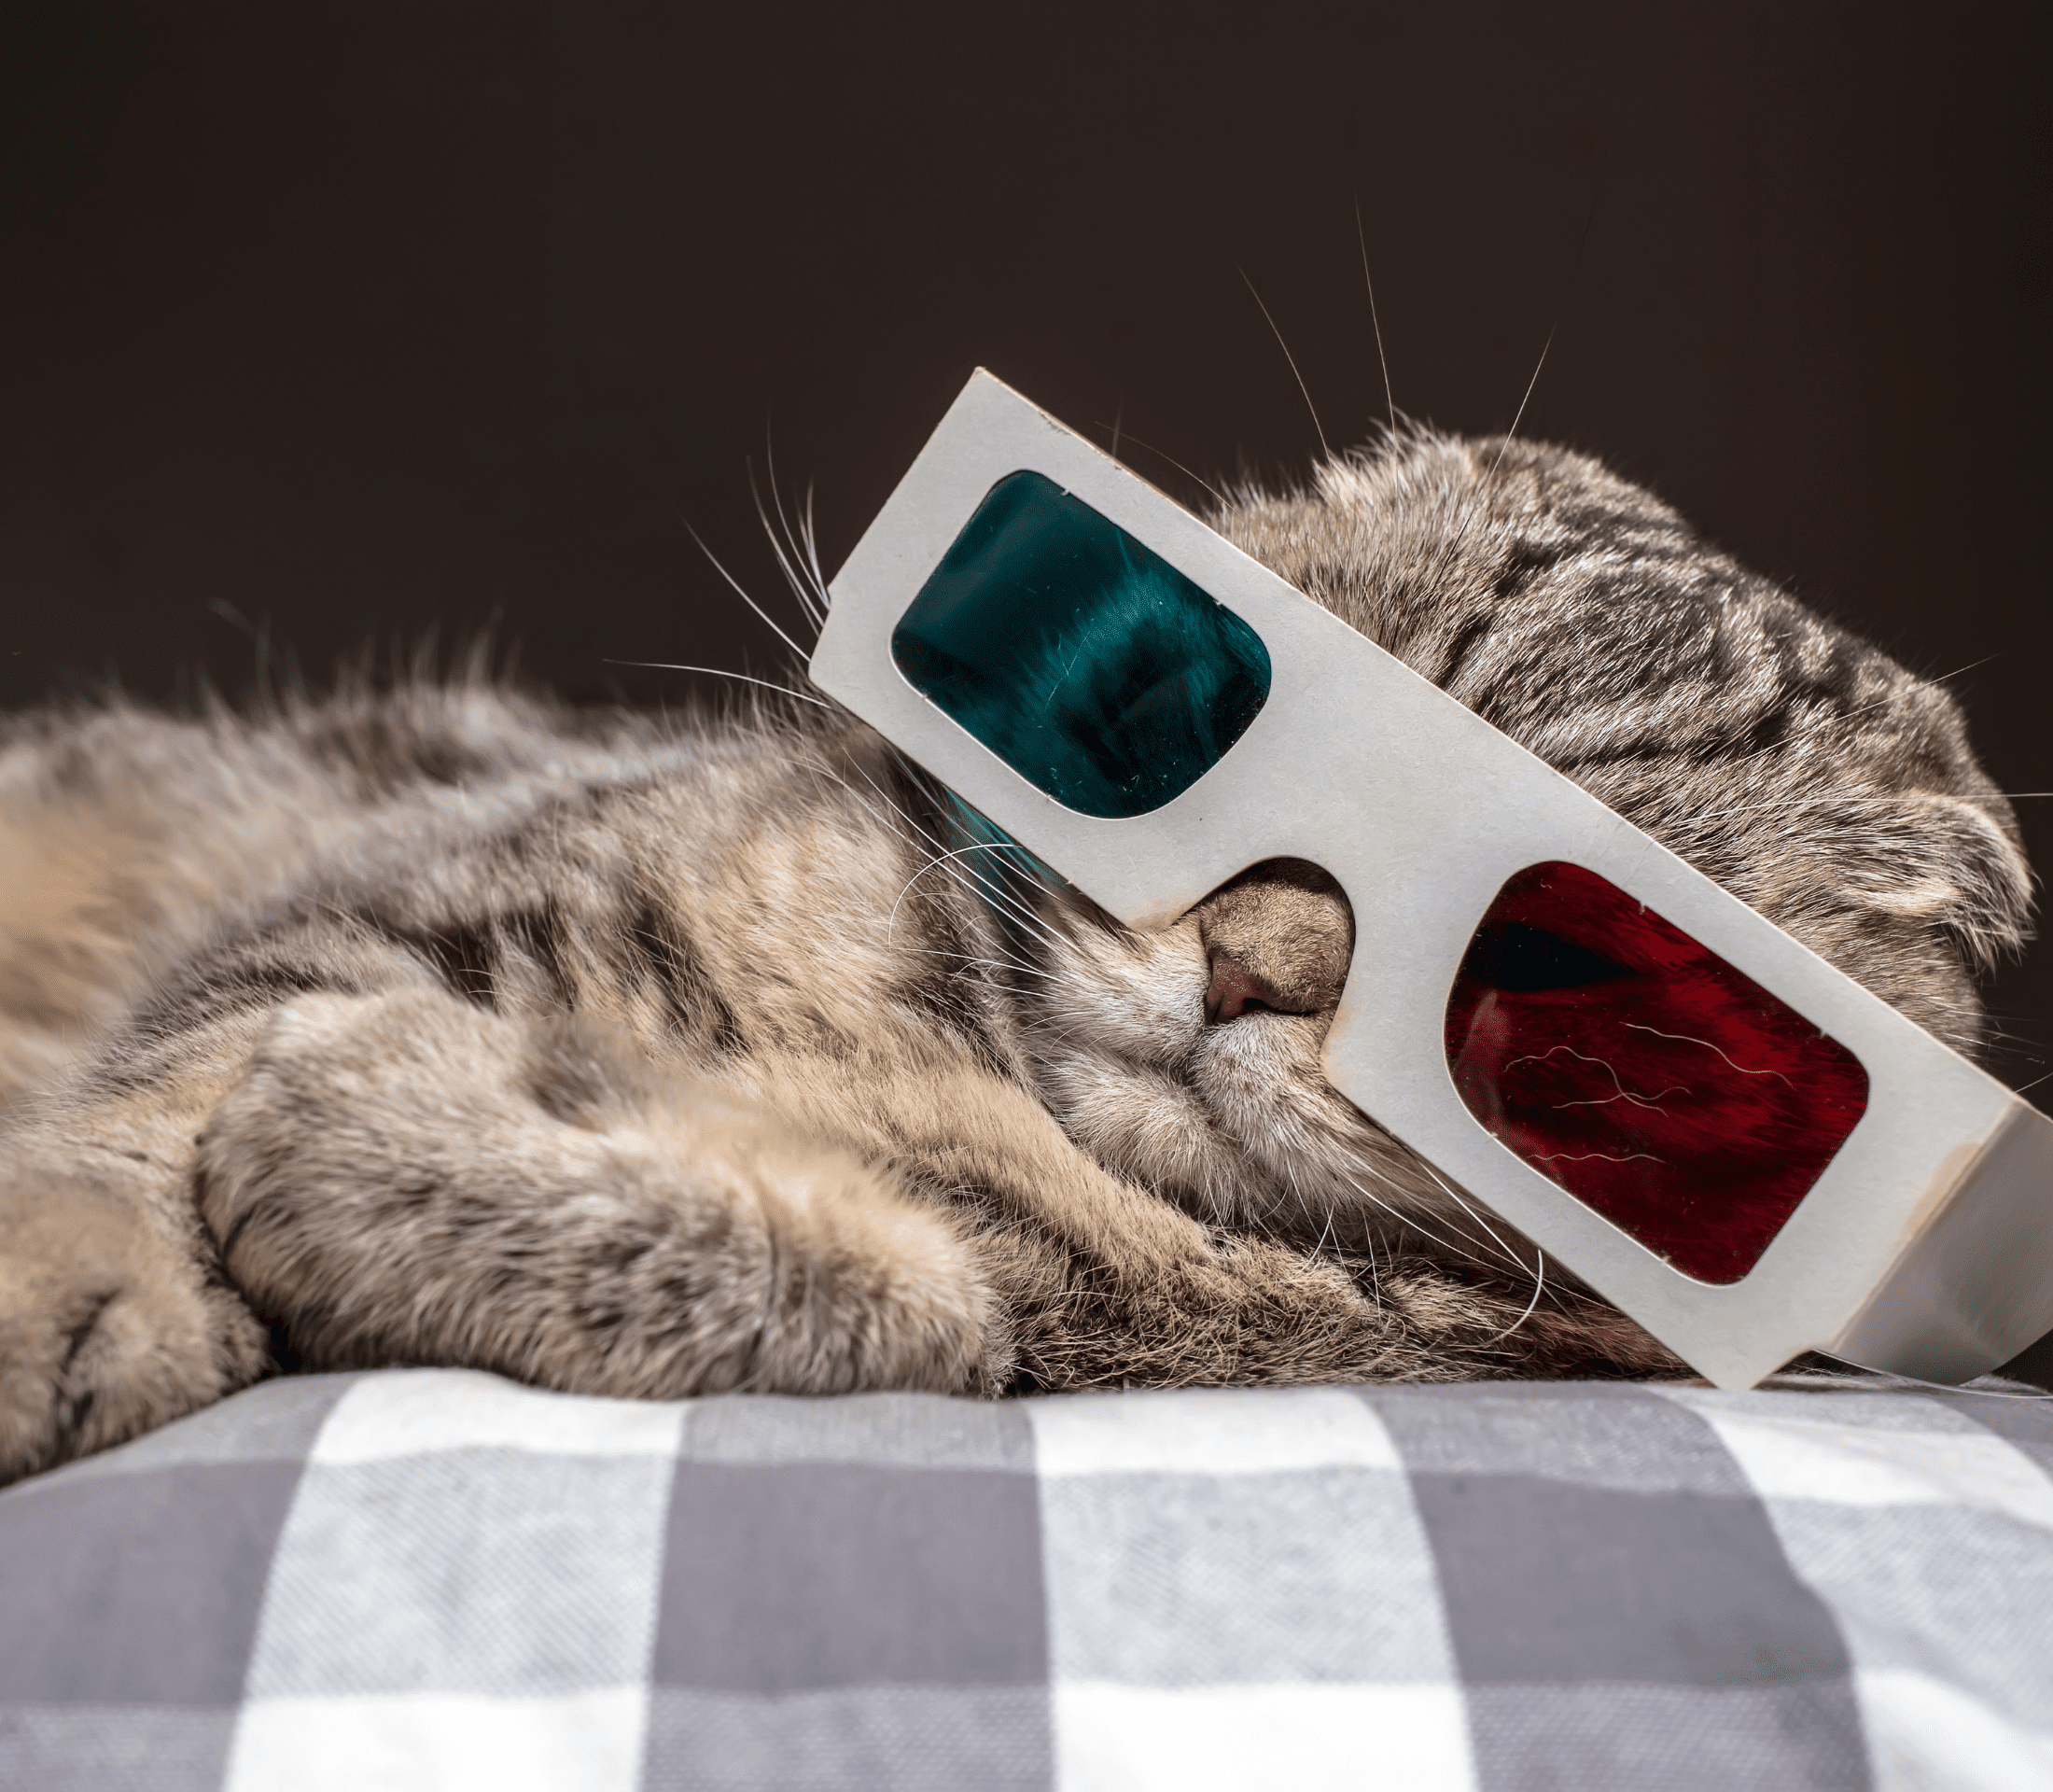 Gray cat with a 3D eyeglasses lays on a gray checkered cloth